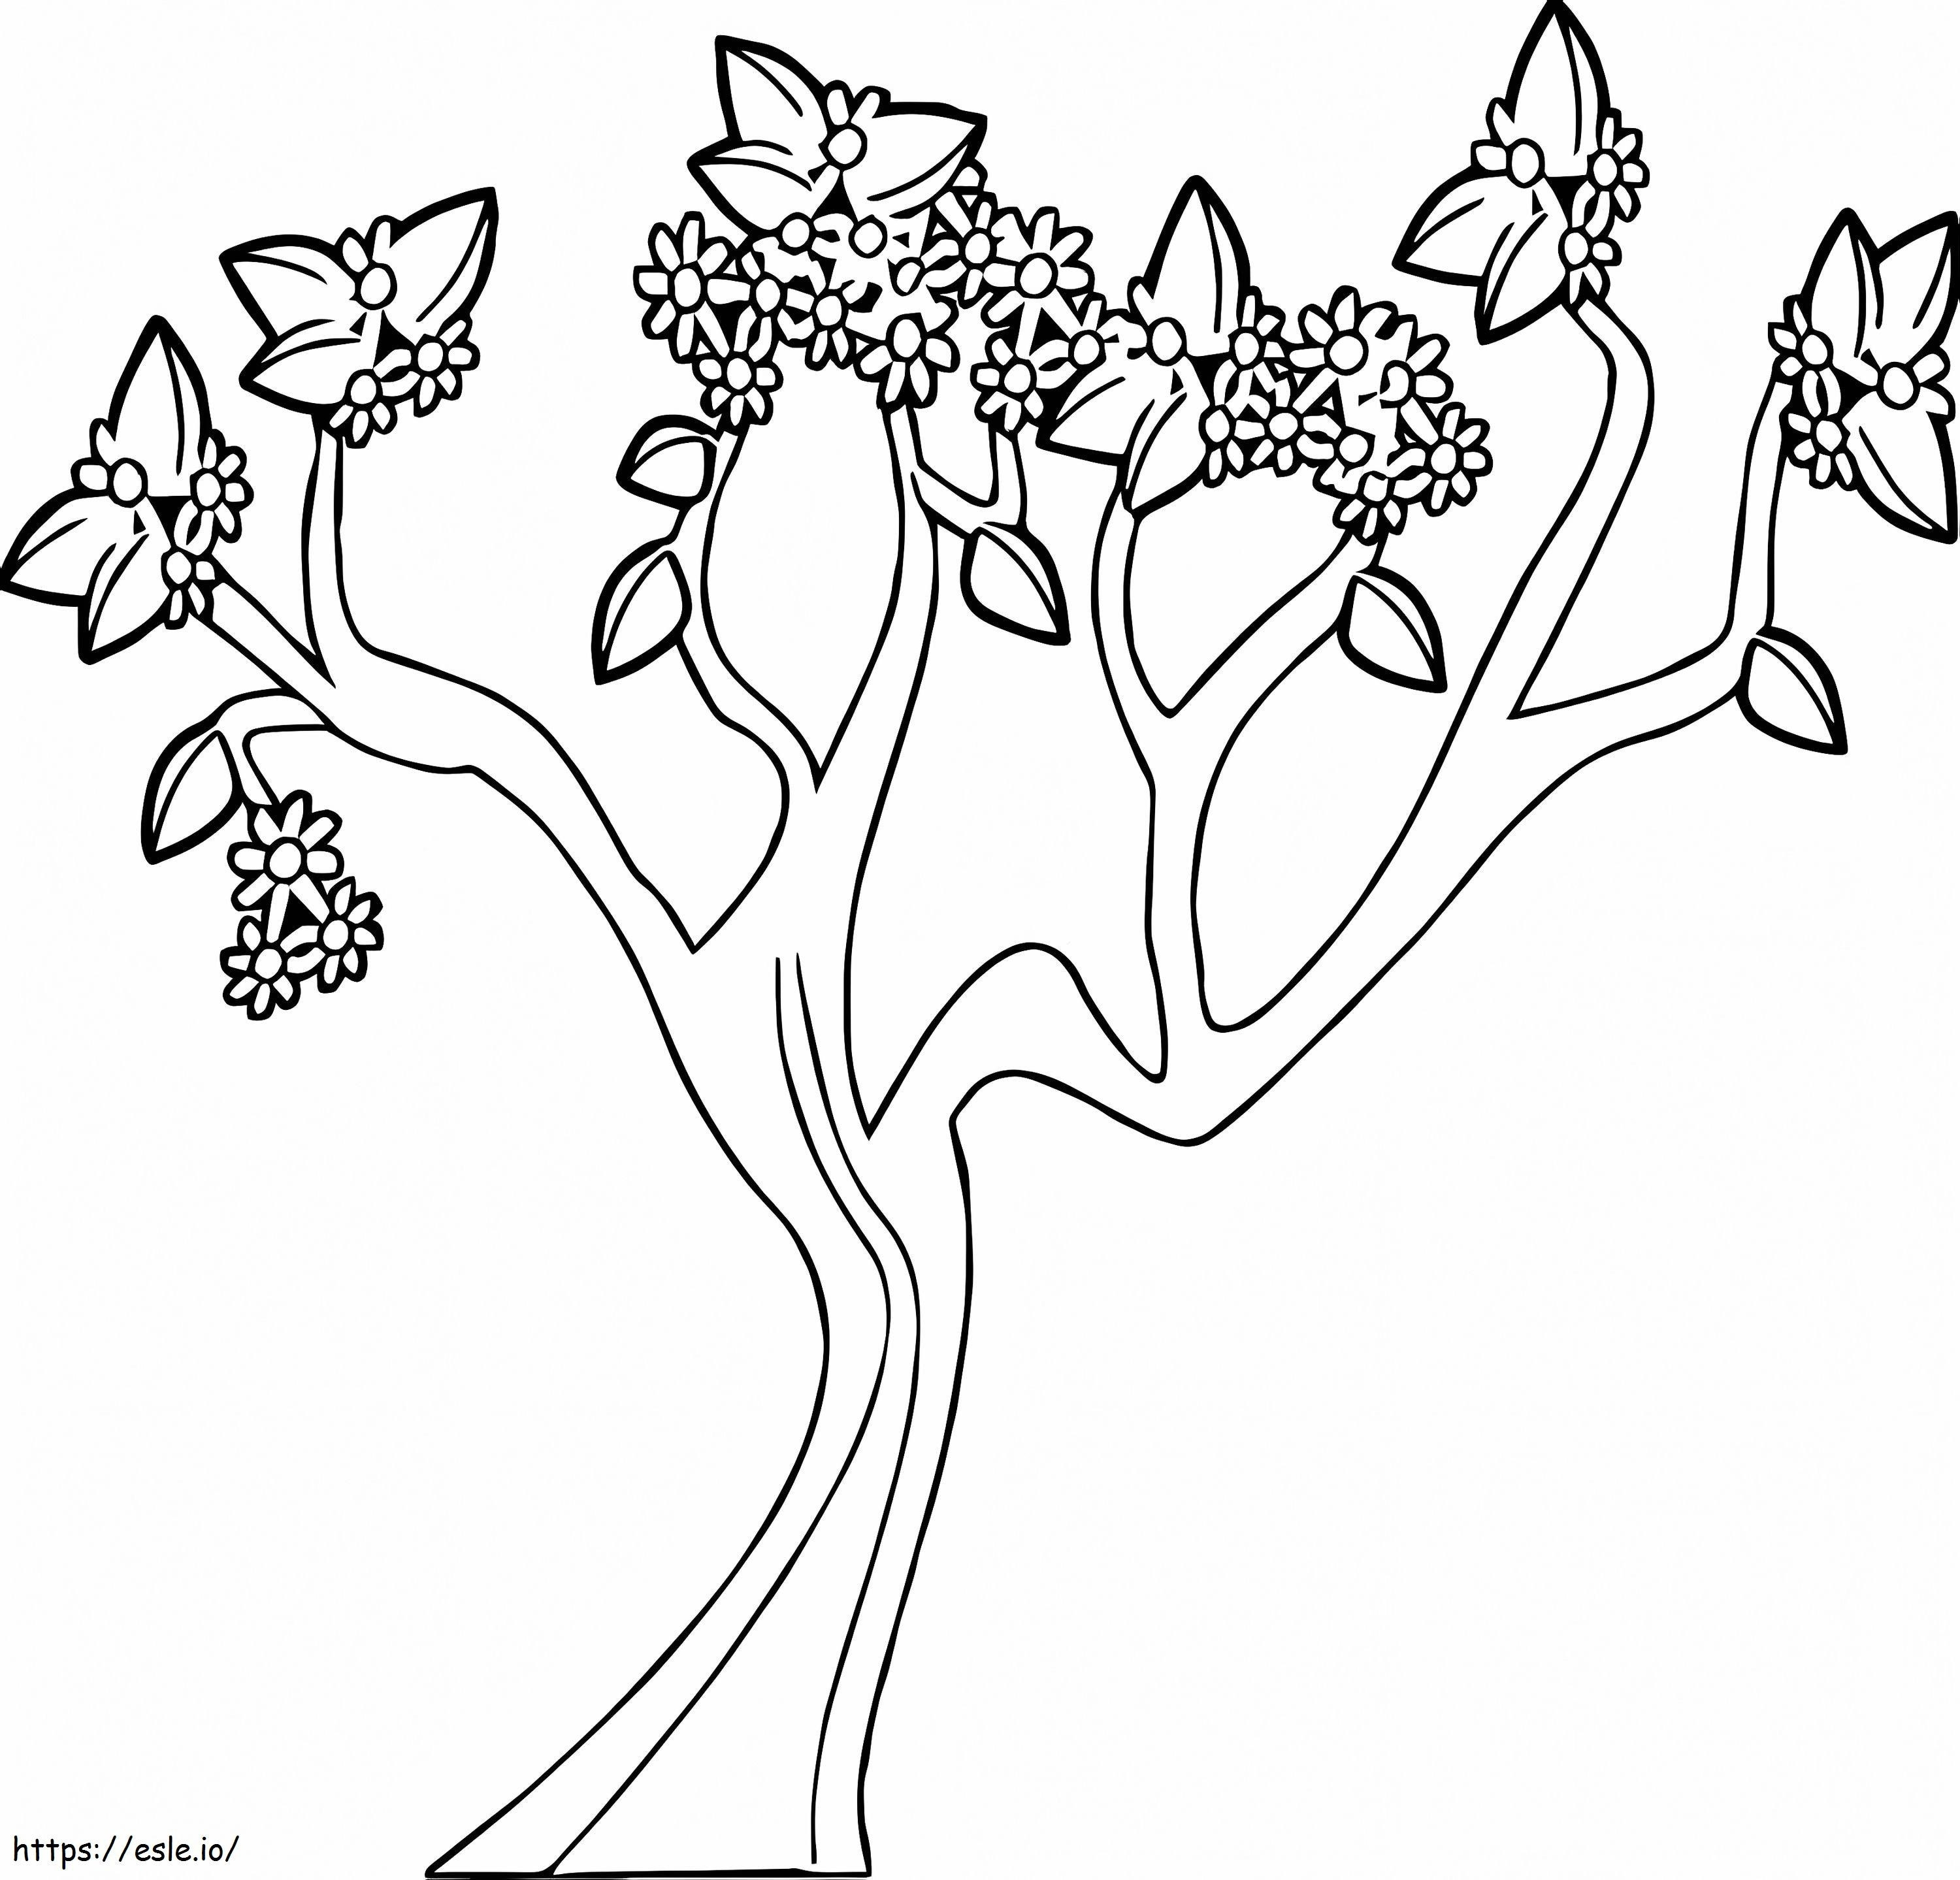 Spring Tree 1 coloring page